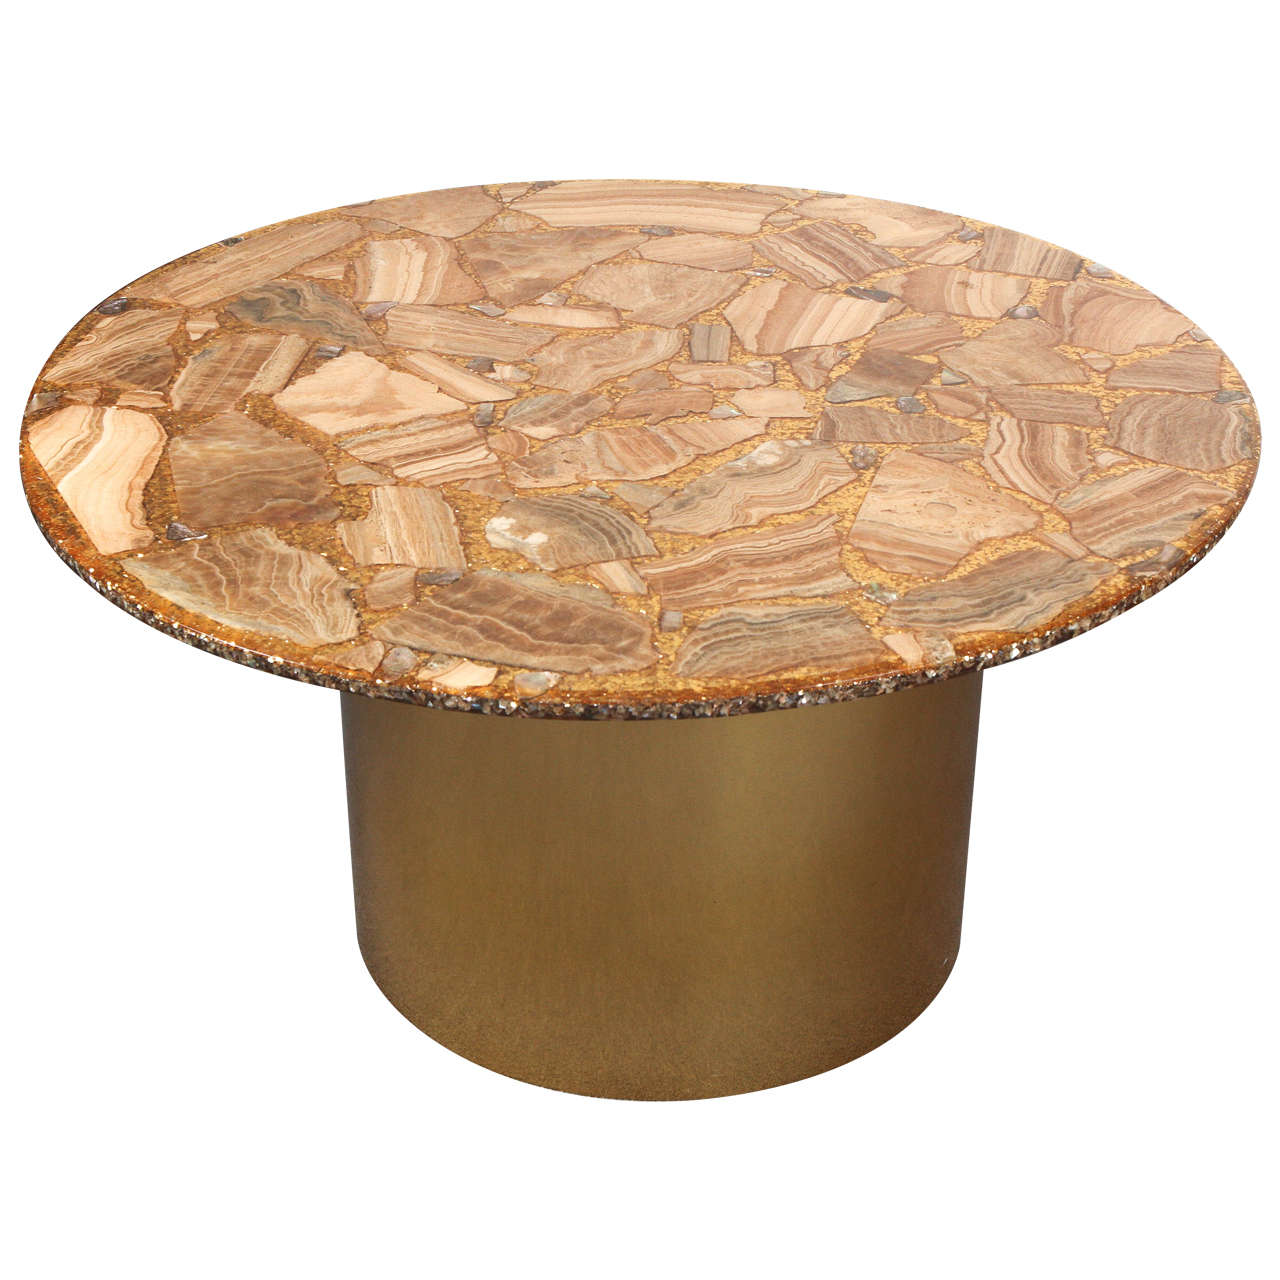 Fabulous Coffee Table with a Top of Agate Embedded in Resin